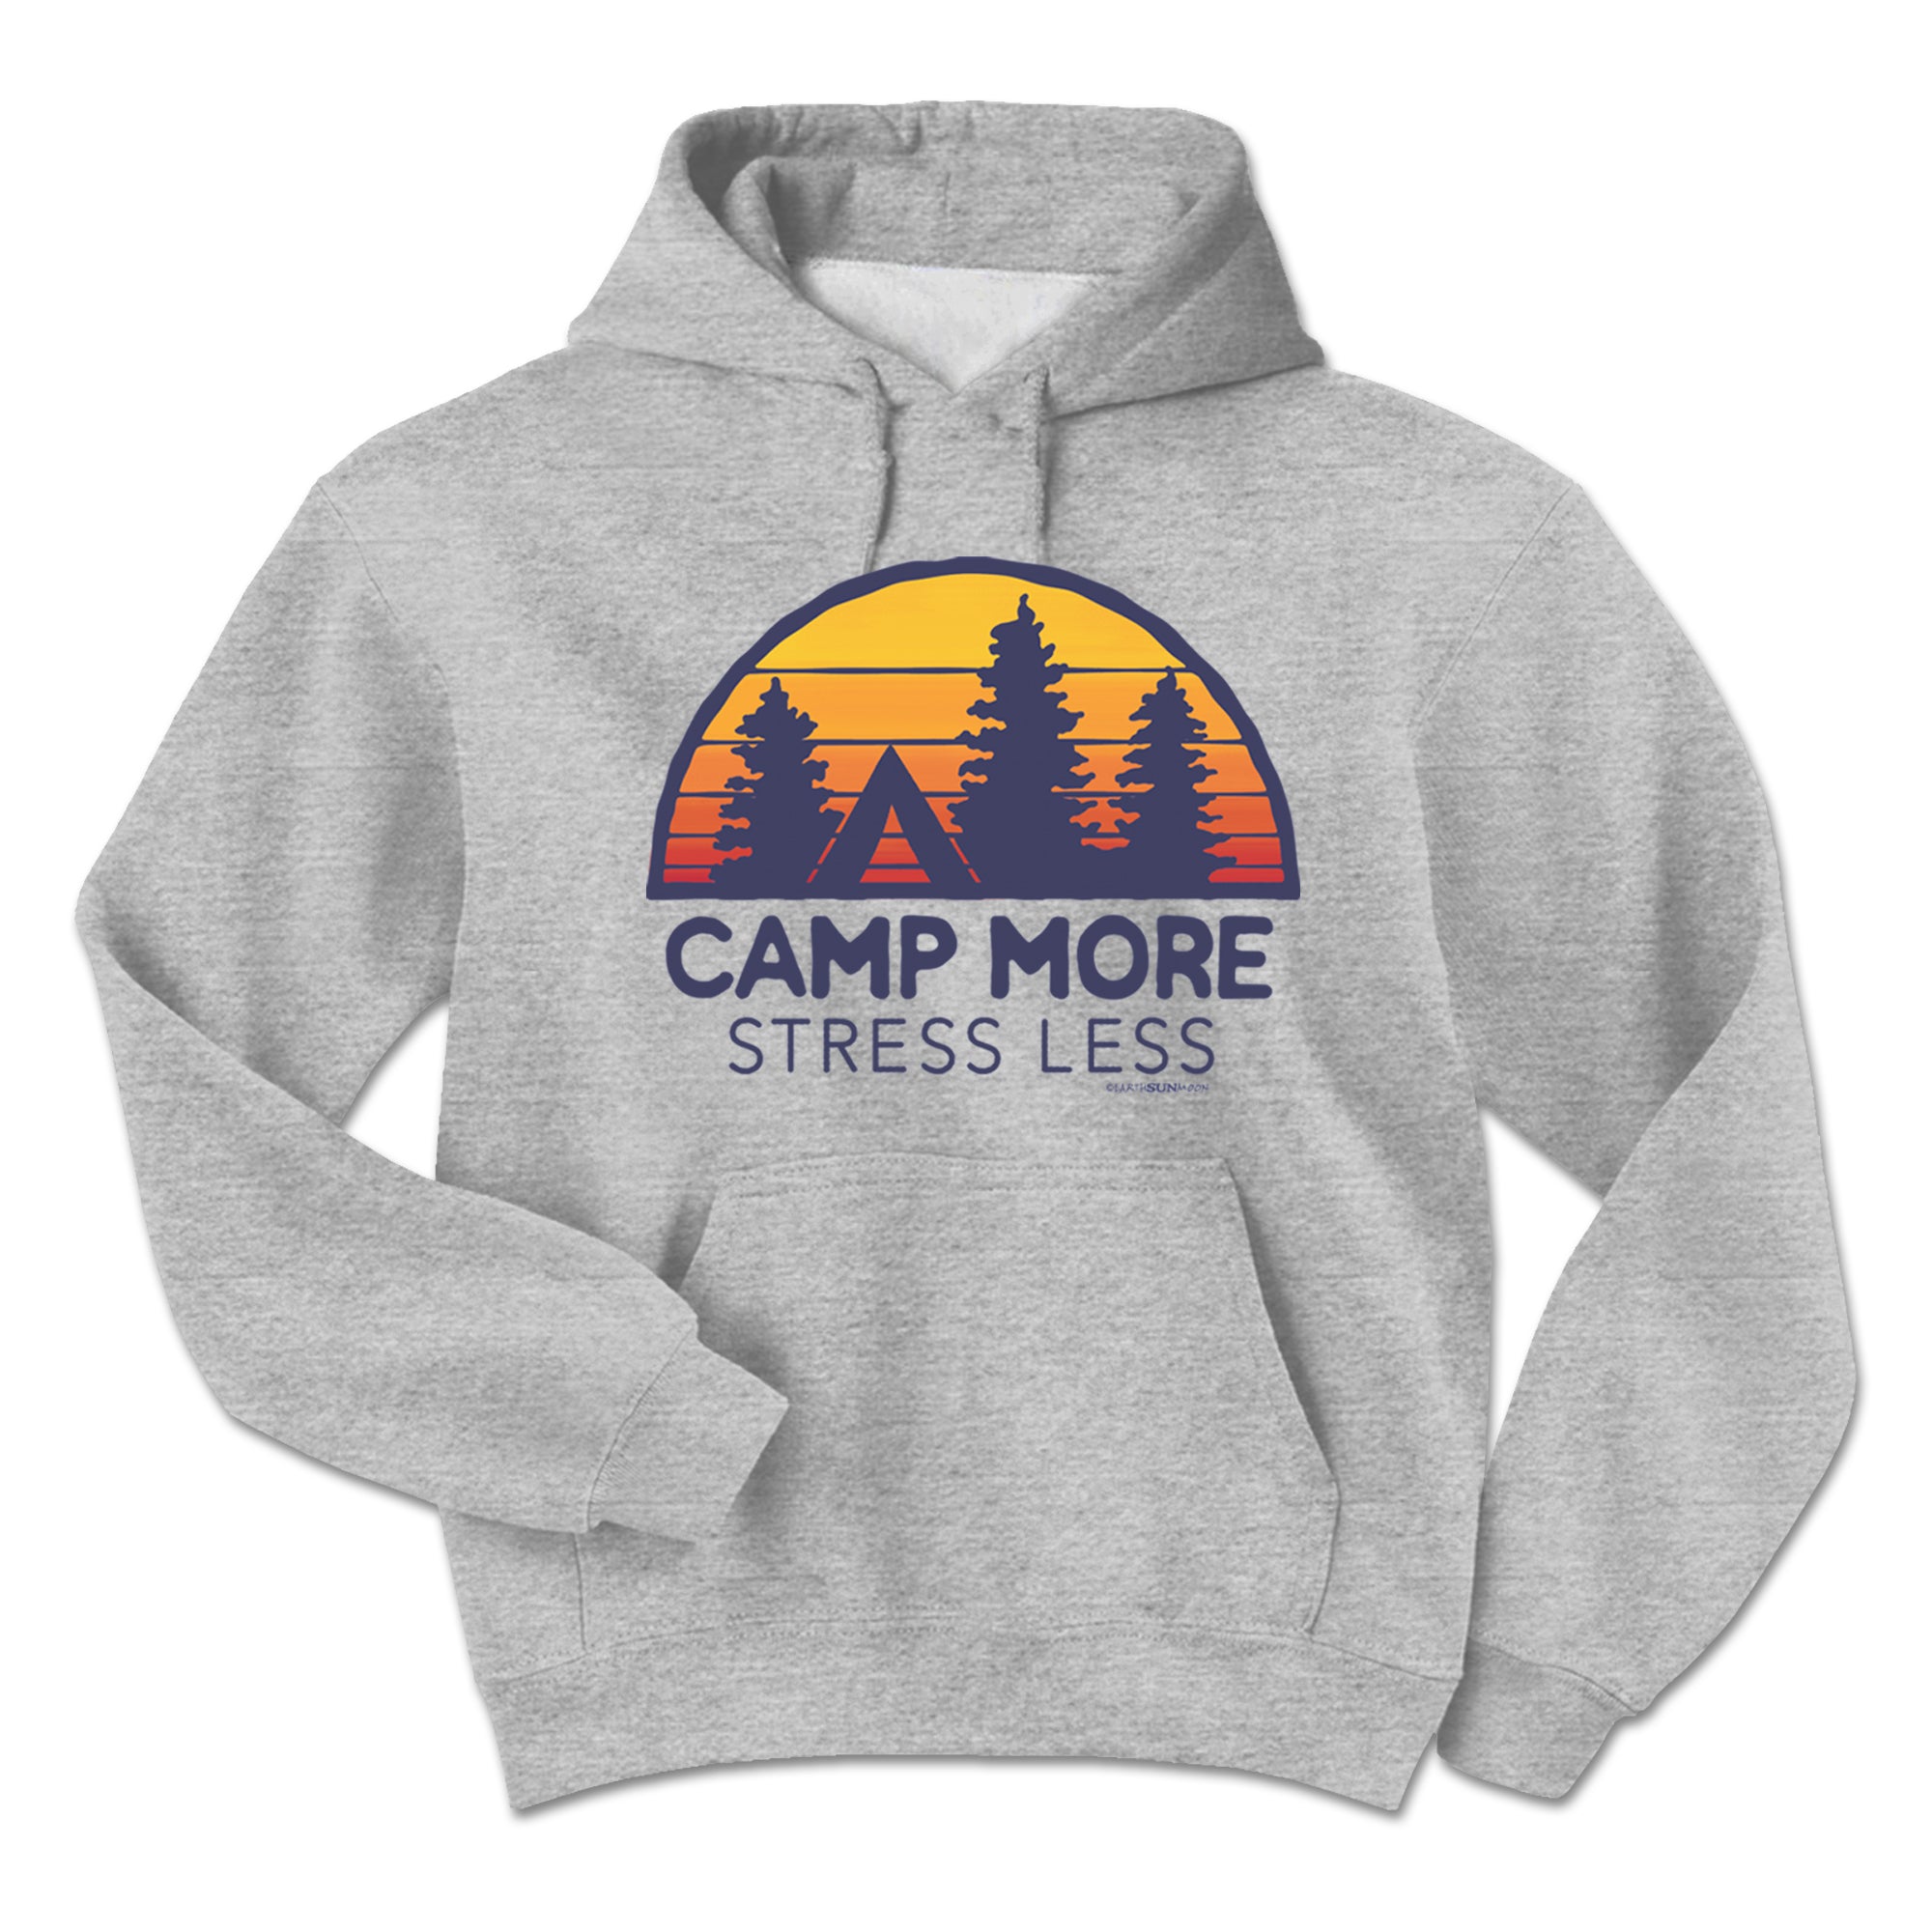 Earth Sun Moon Camp More Stress Less Adult Hoodie - Sports Grey - S